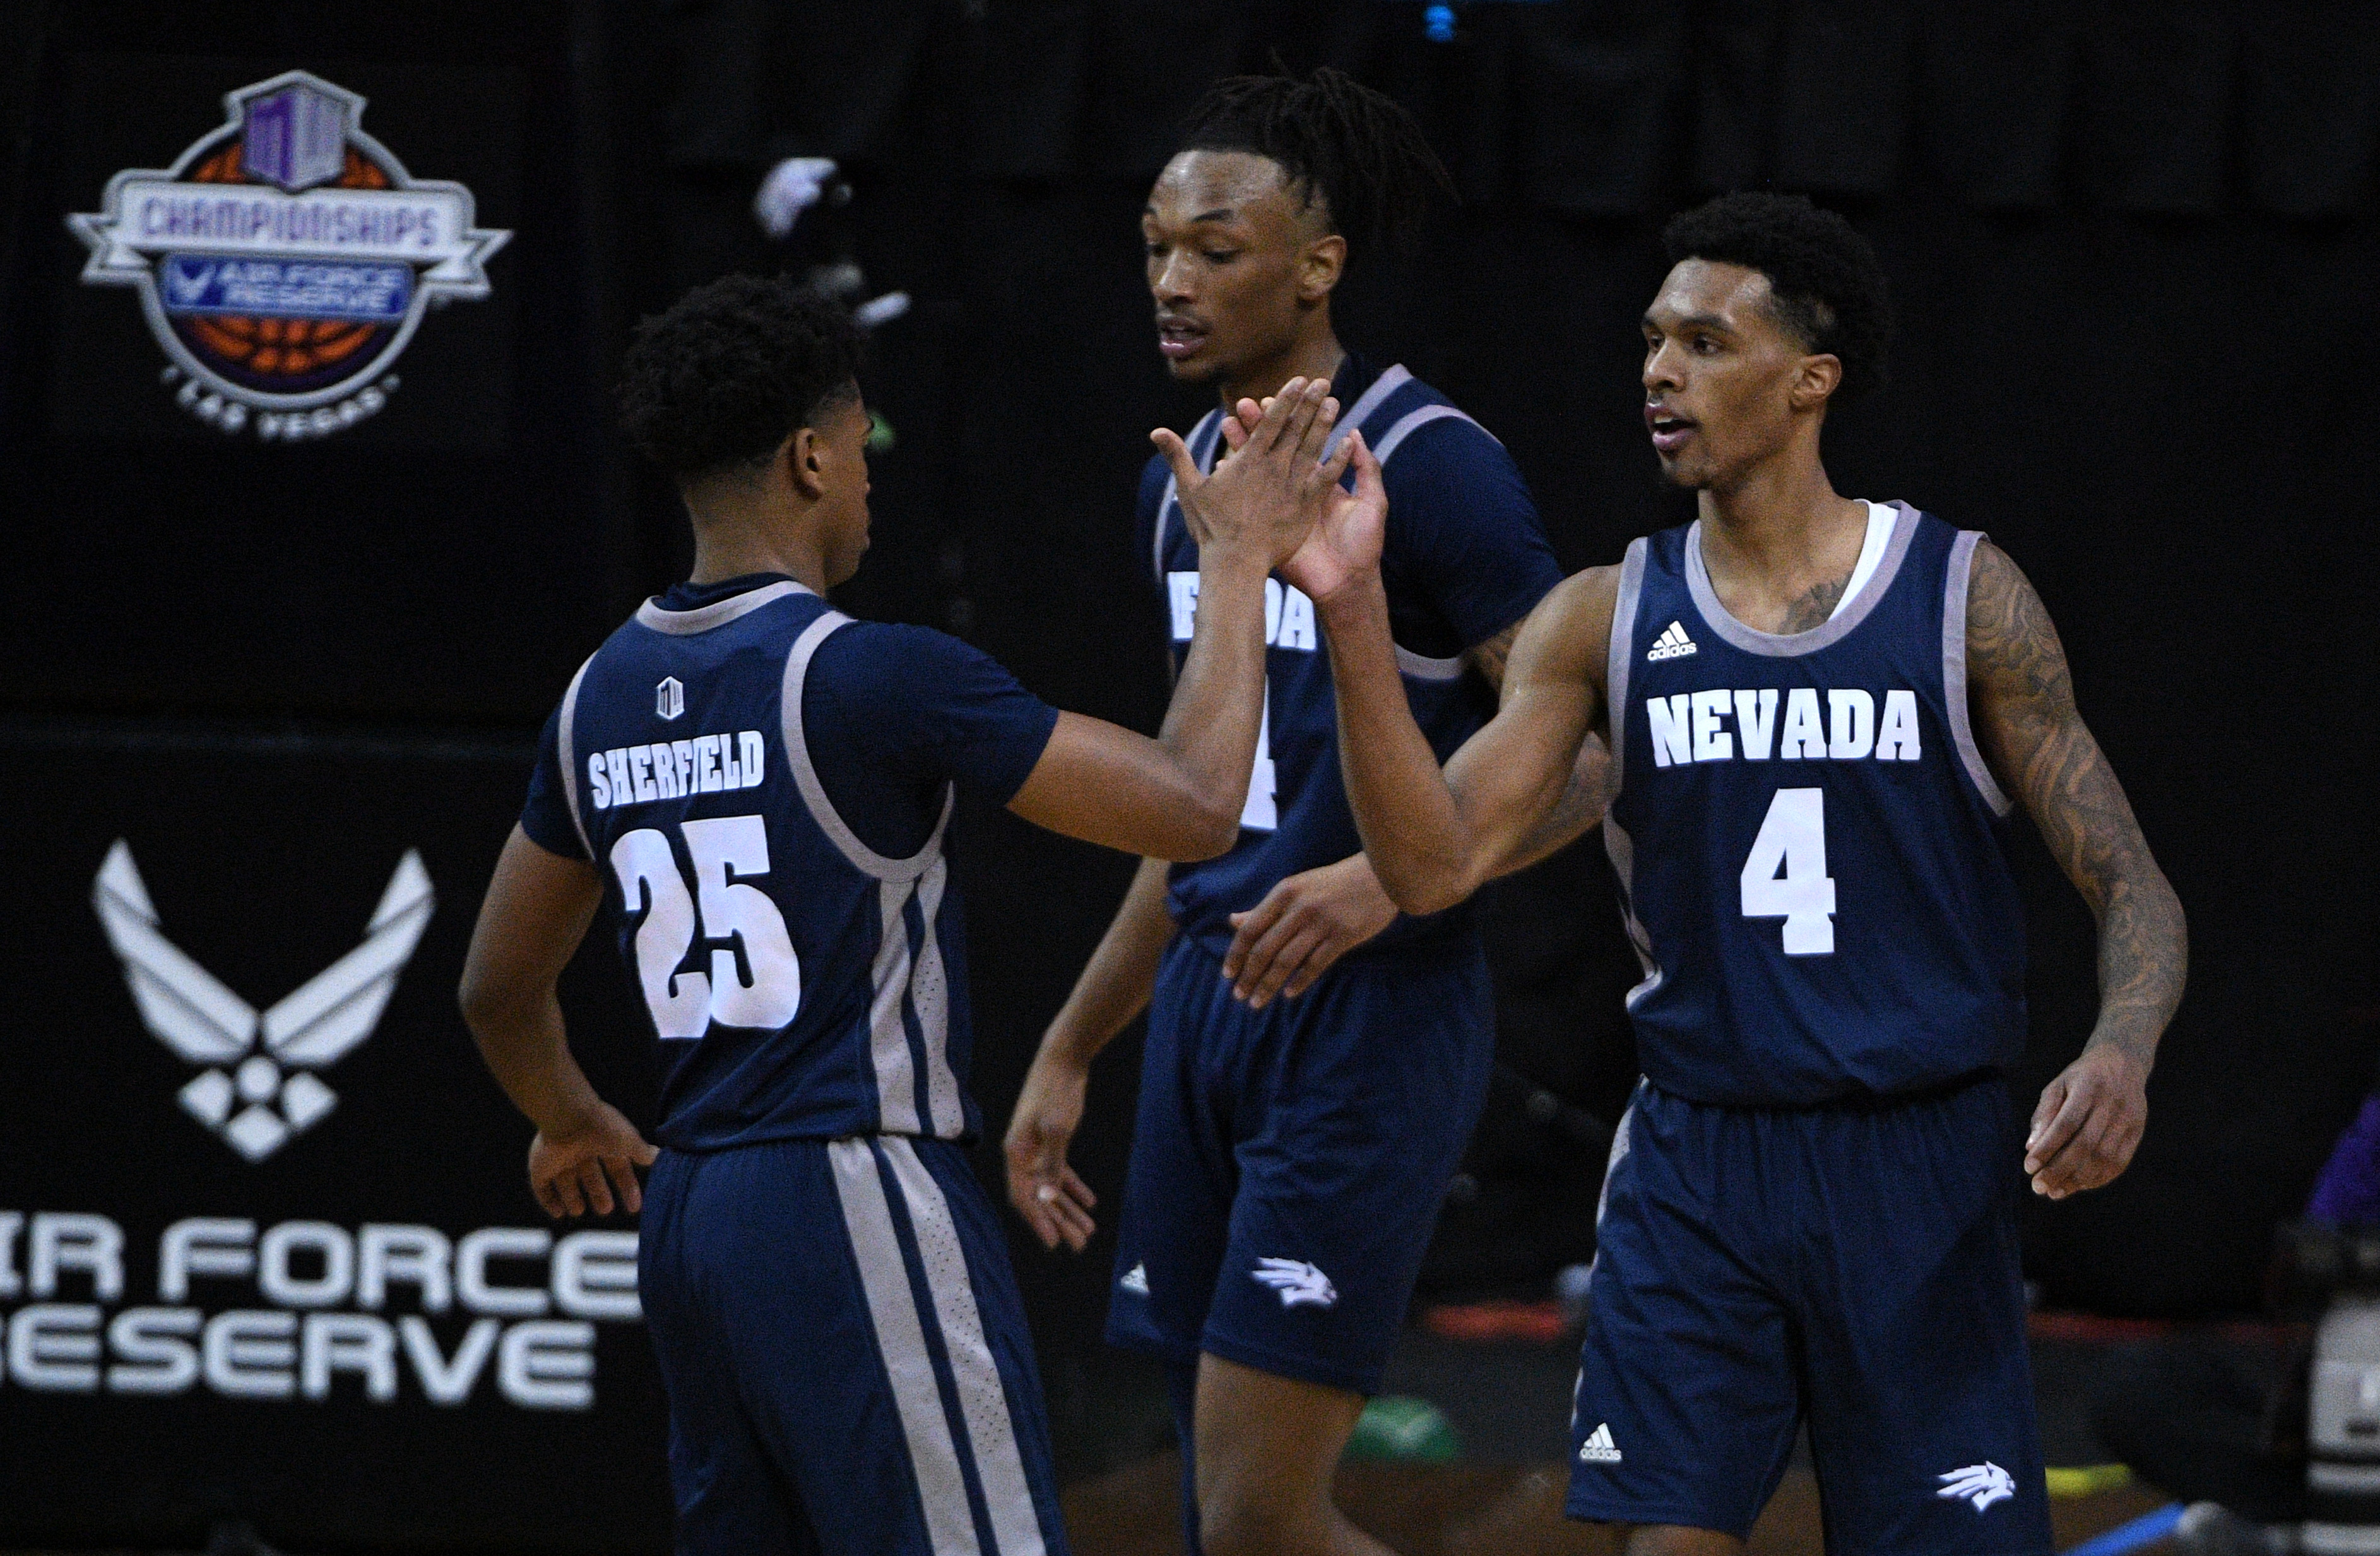 NCAA Basketball: Mountain West Conference Tournament- Nevada vs Boise St.